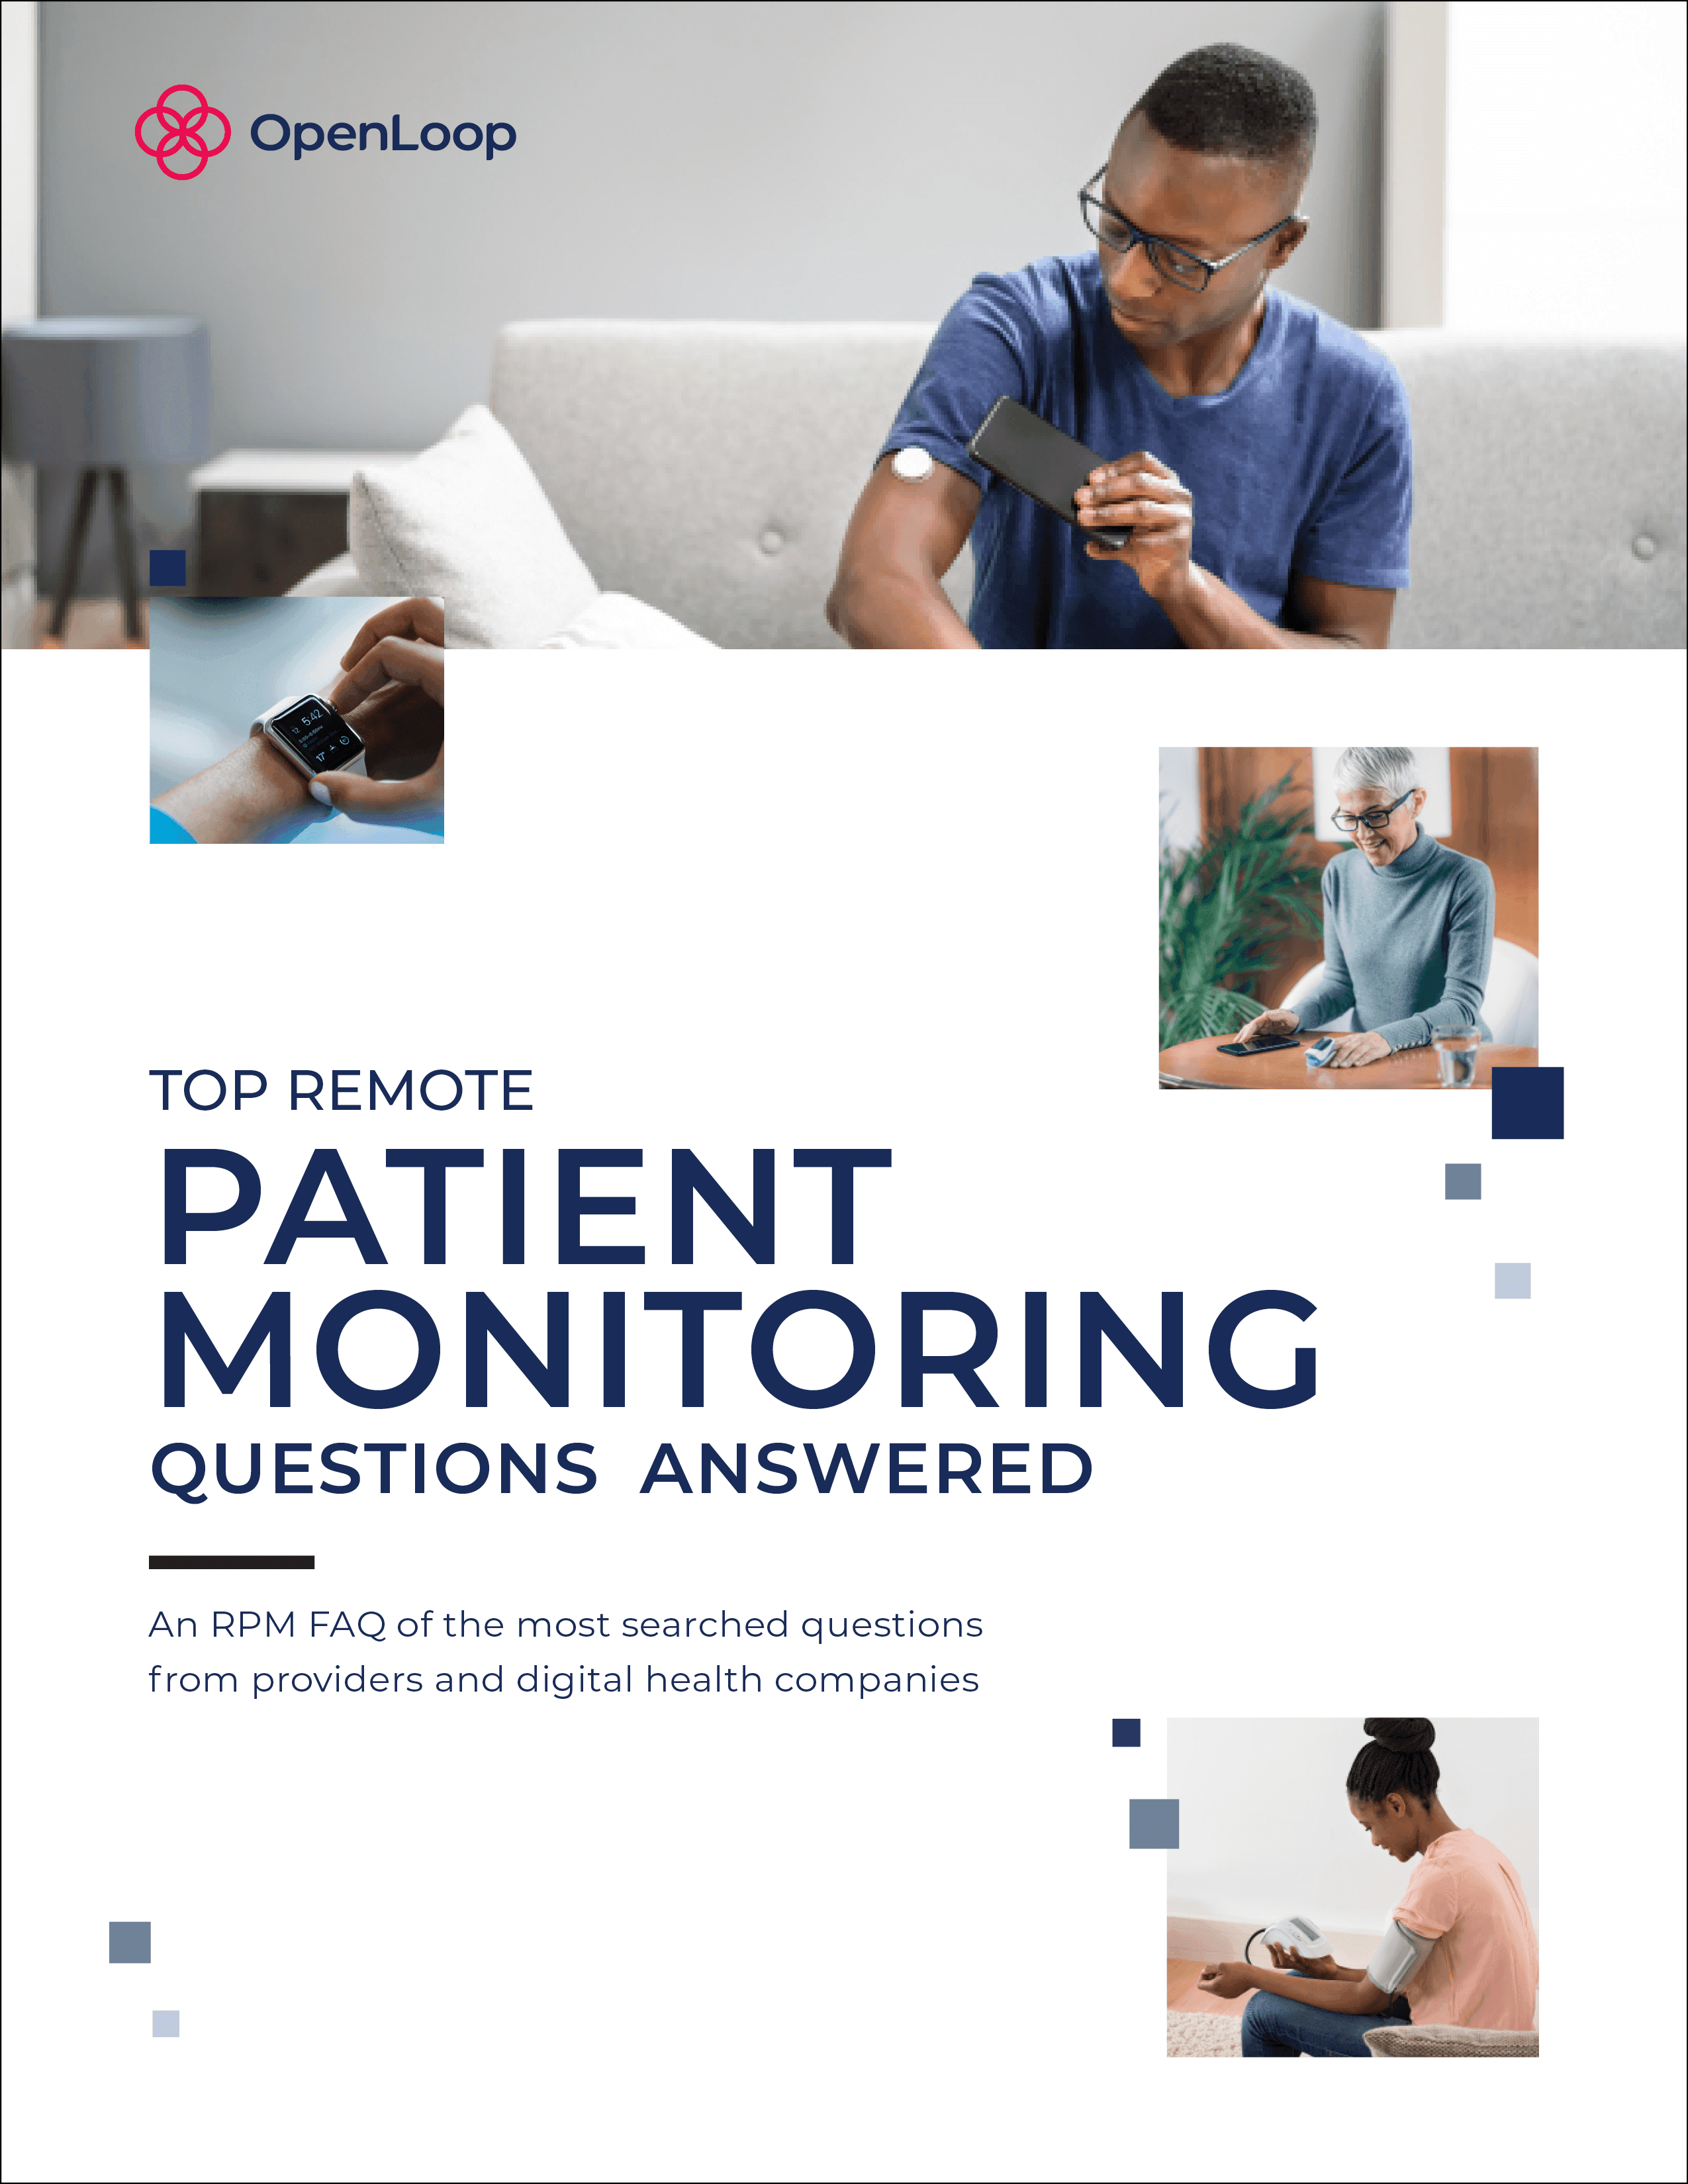 Top Remote Patient Monitoring Questions Answered